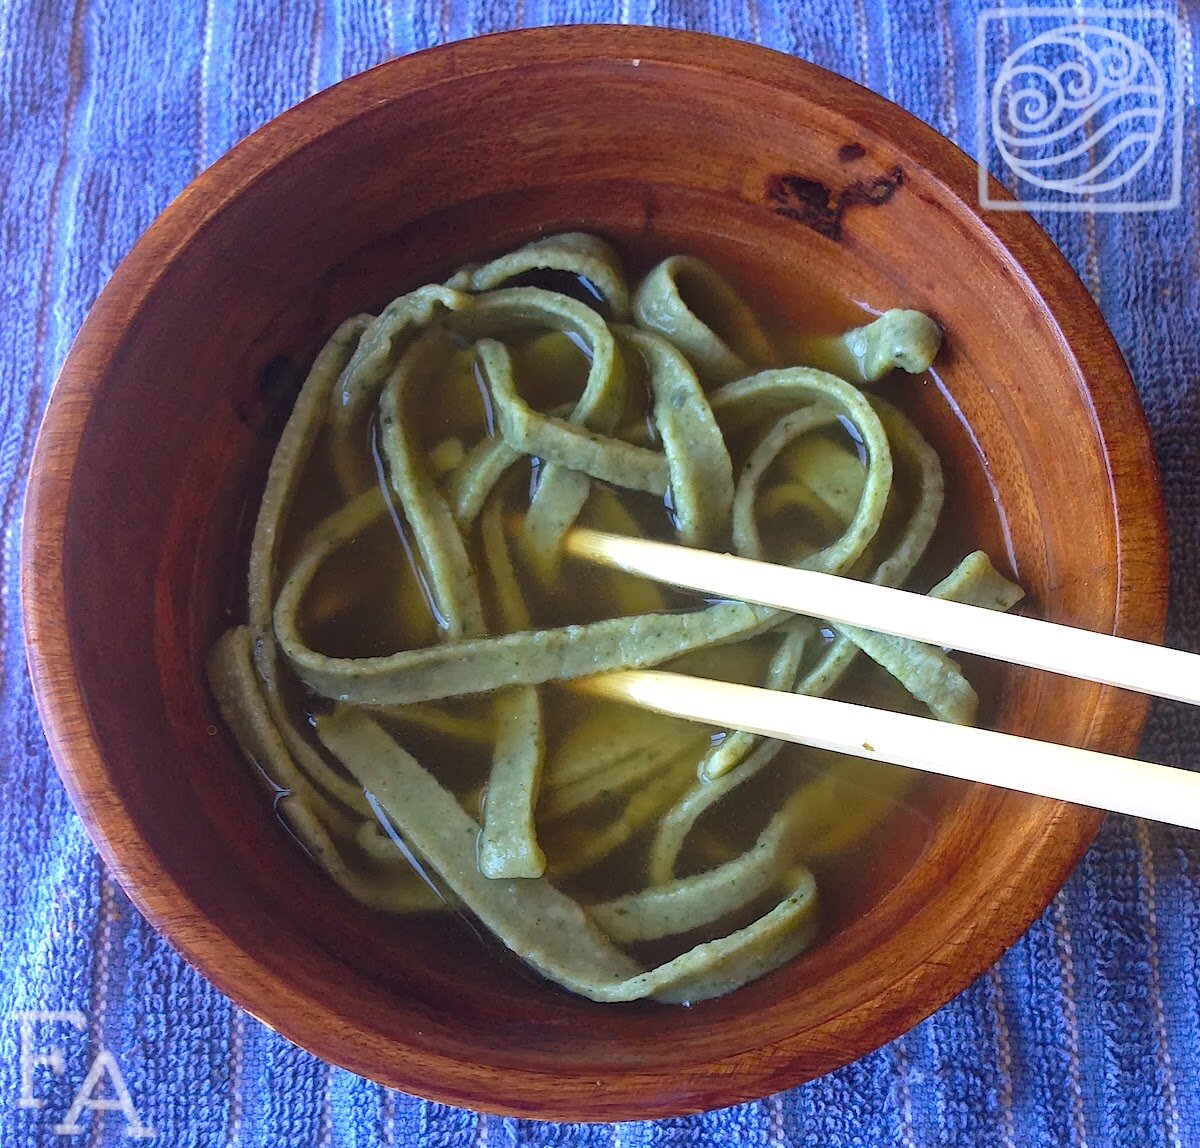 Seaweed Noodles from "The Legend of Korra"